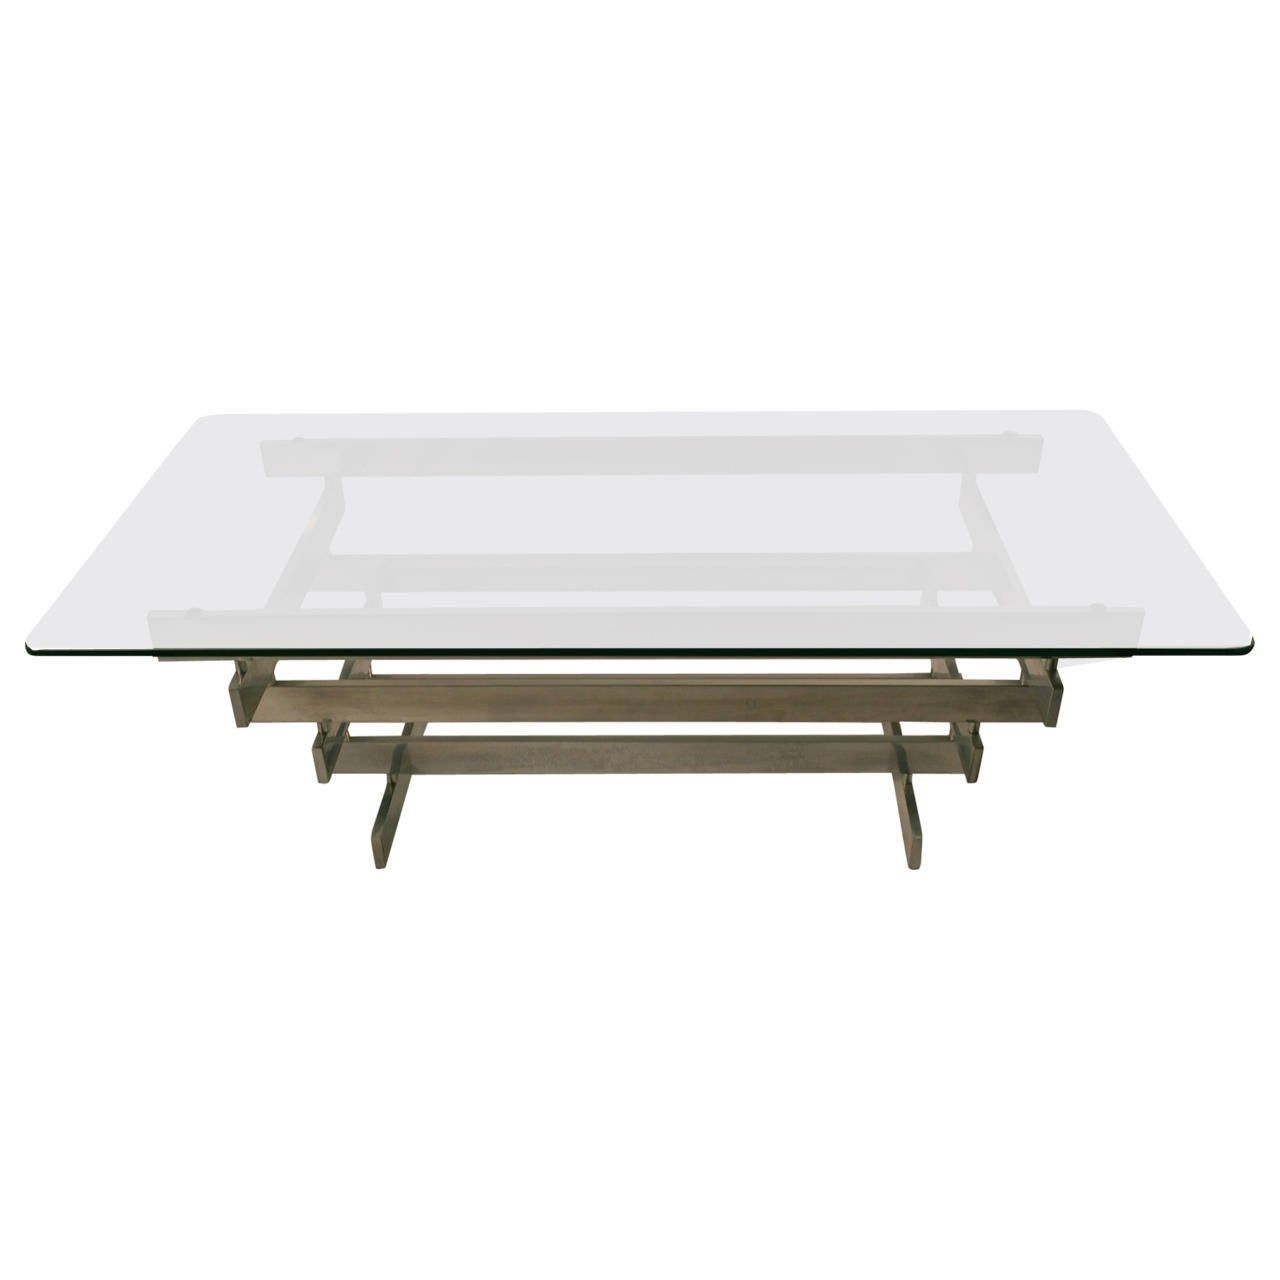 Stacked Aluminum Block Base Glass Top Coffee Table For Sale At 1stdibs Throughout Large Frosted Glass Aluminum Desks (Photo 2 of 15)